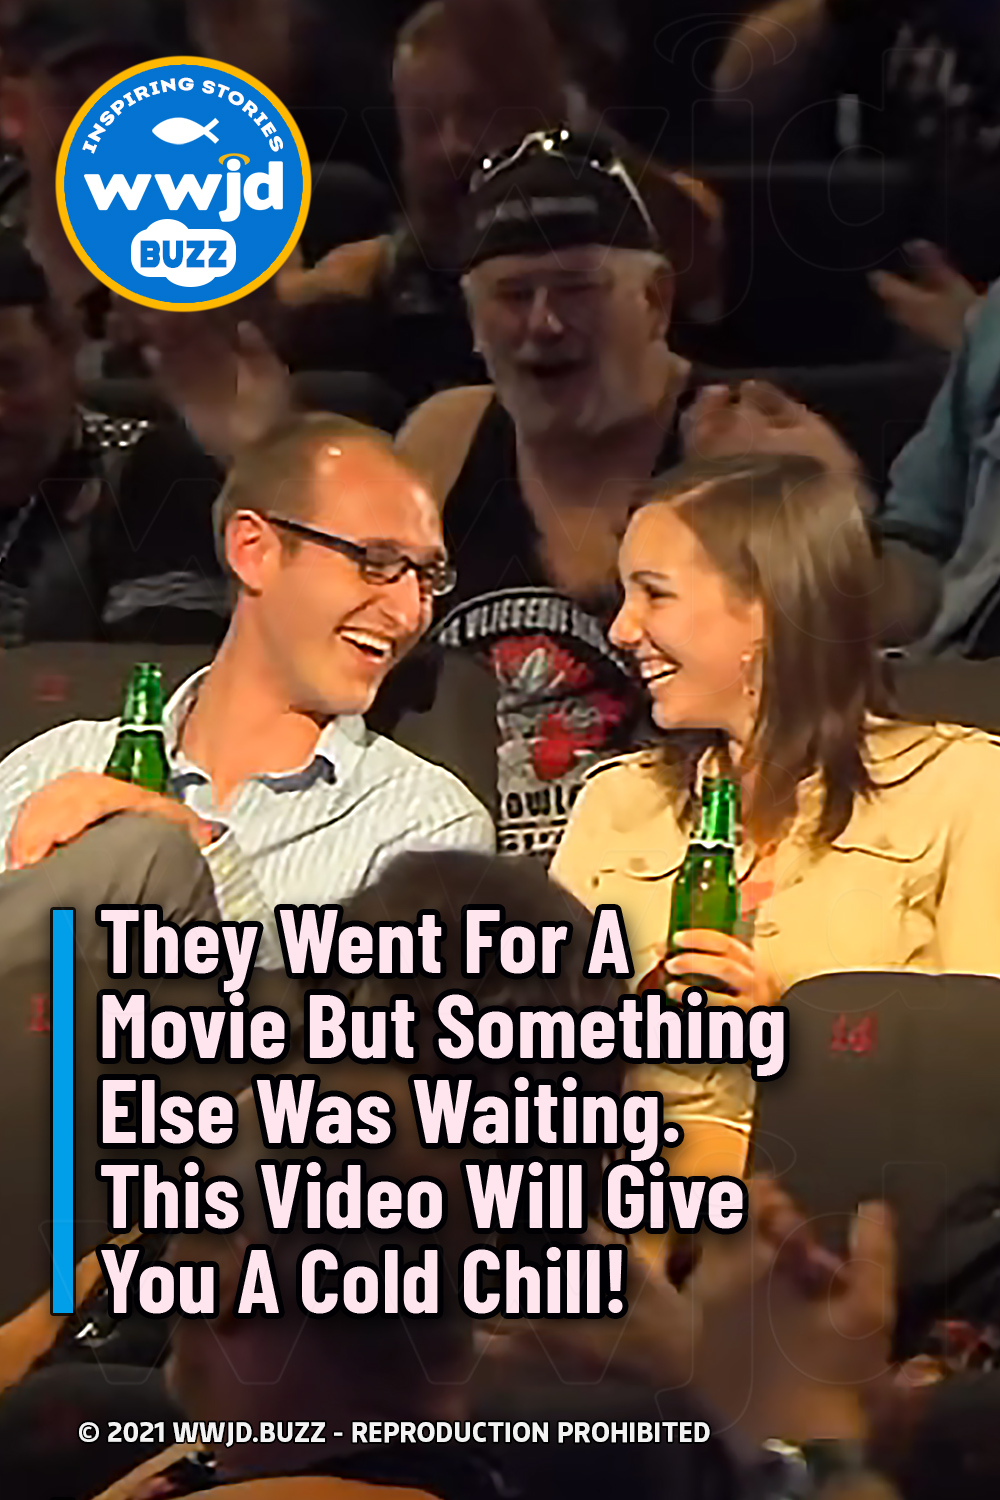 They Went For A Movie But Something Else Was Waiting. This Video Will Give You A Cold Chill!